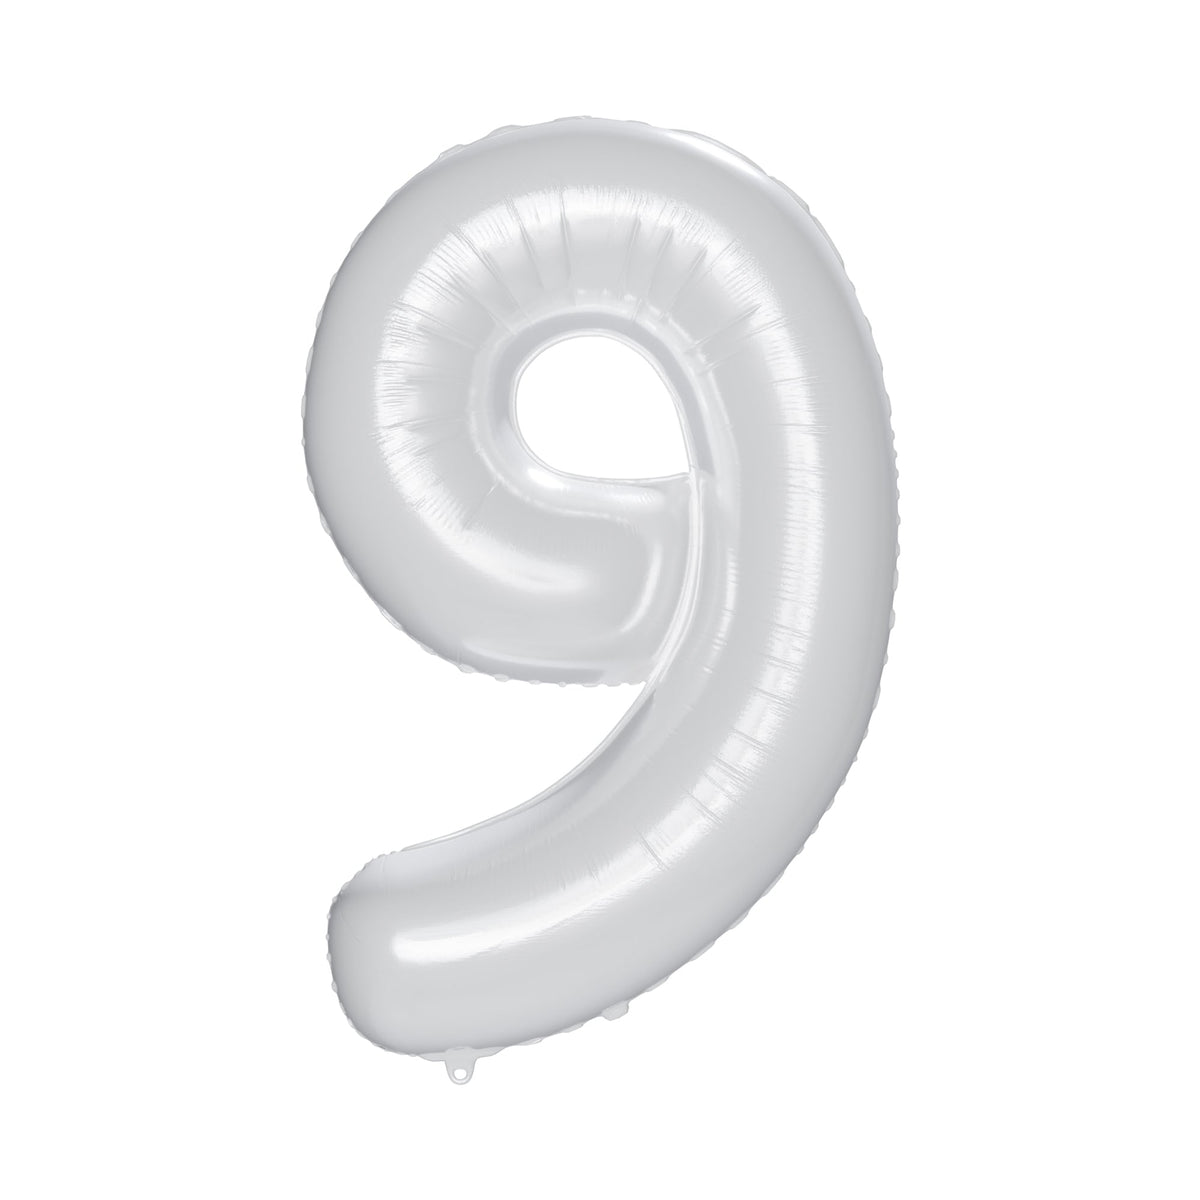 PARTYGRAM Balloons Frosty White Number 9 Foil Balloon, Matte Finish, 34 Inches, 1 Count 810077658239